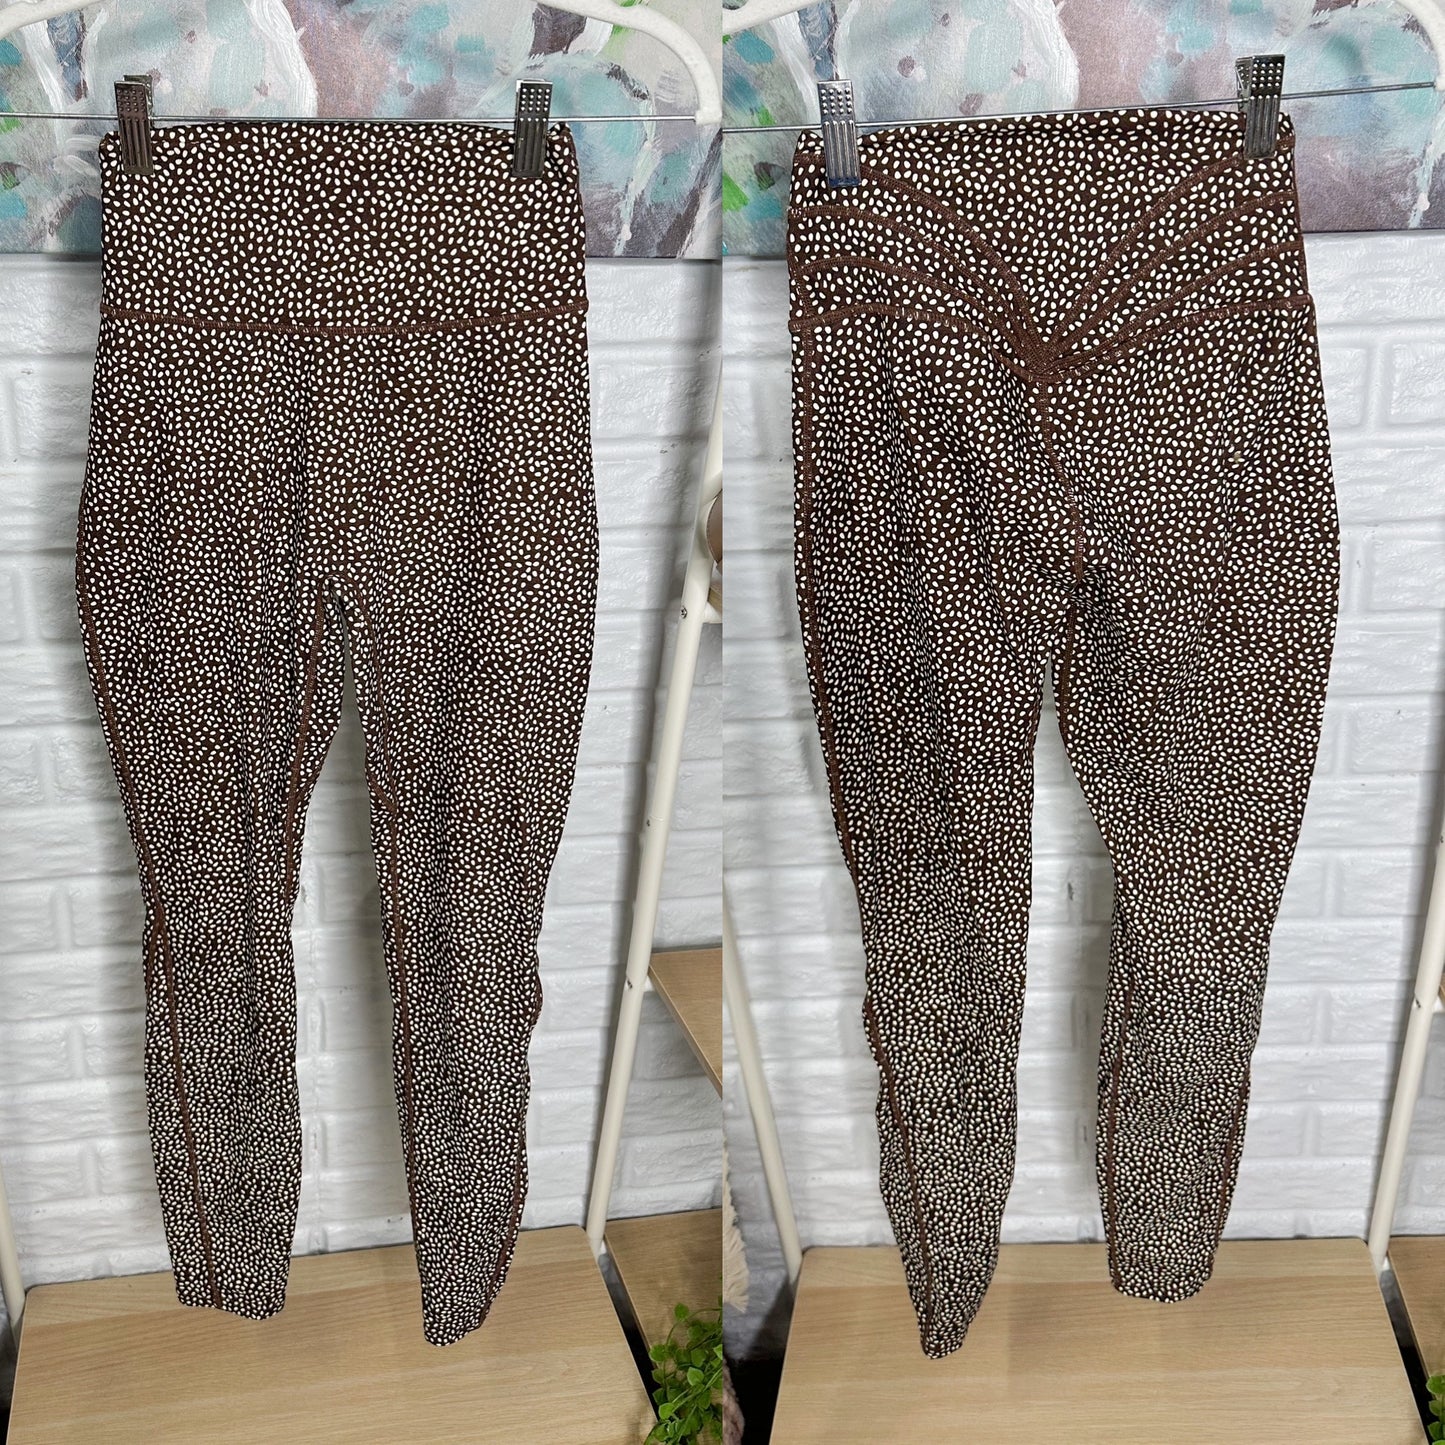 Aoxjox Coffee Dotted Leggings Size Medium